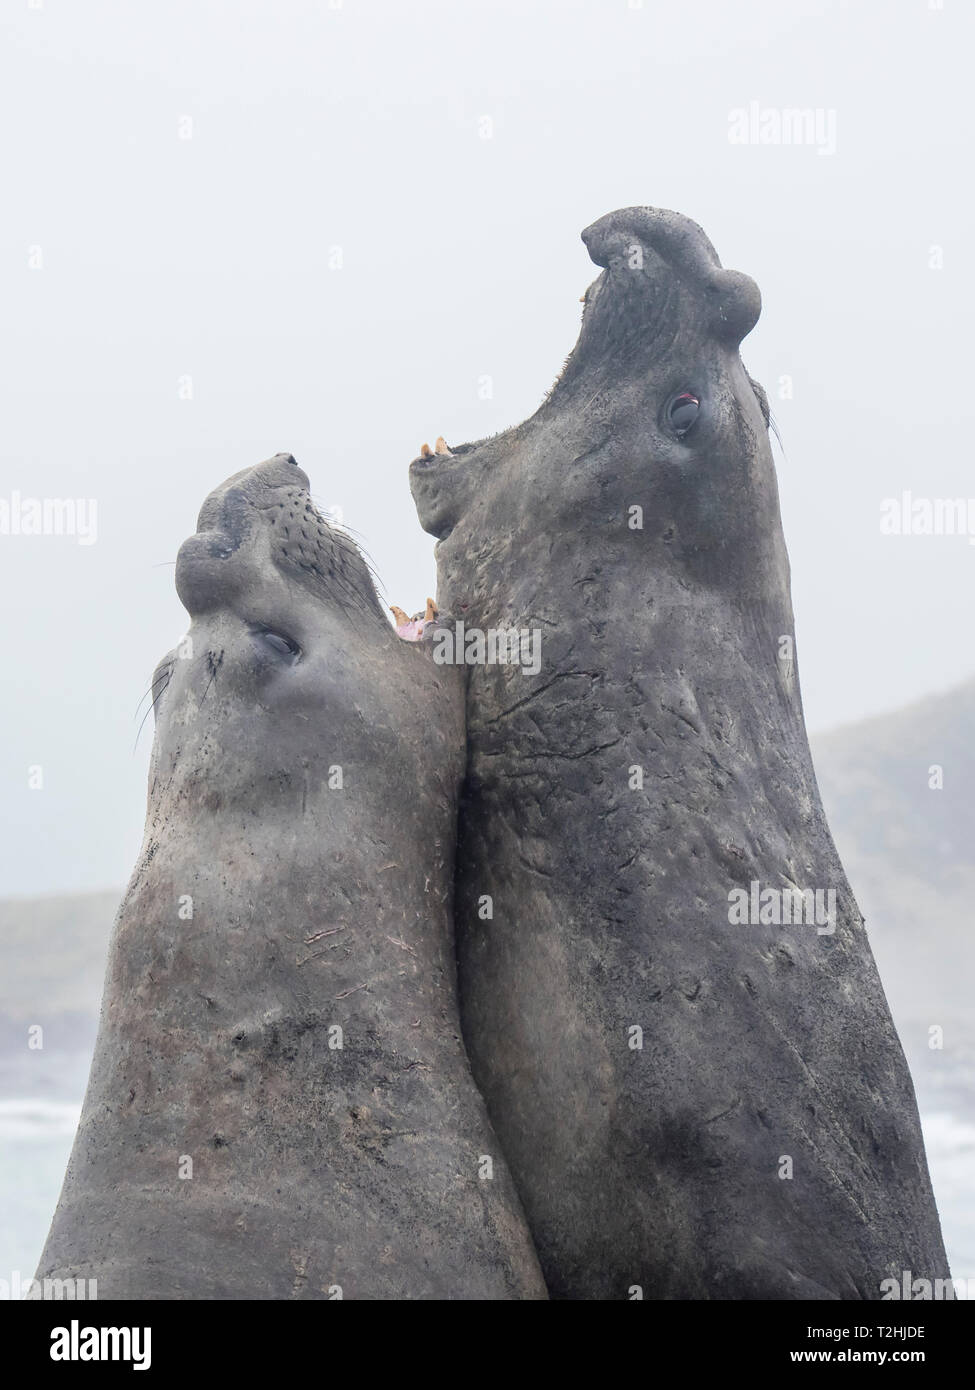 Adult bull southern elephant seals, Mirounga leonina, fighting for territory in Gold Harbour, South Georgia Island, Atlantic Ocean Stock Photo